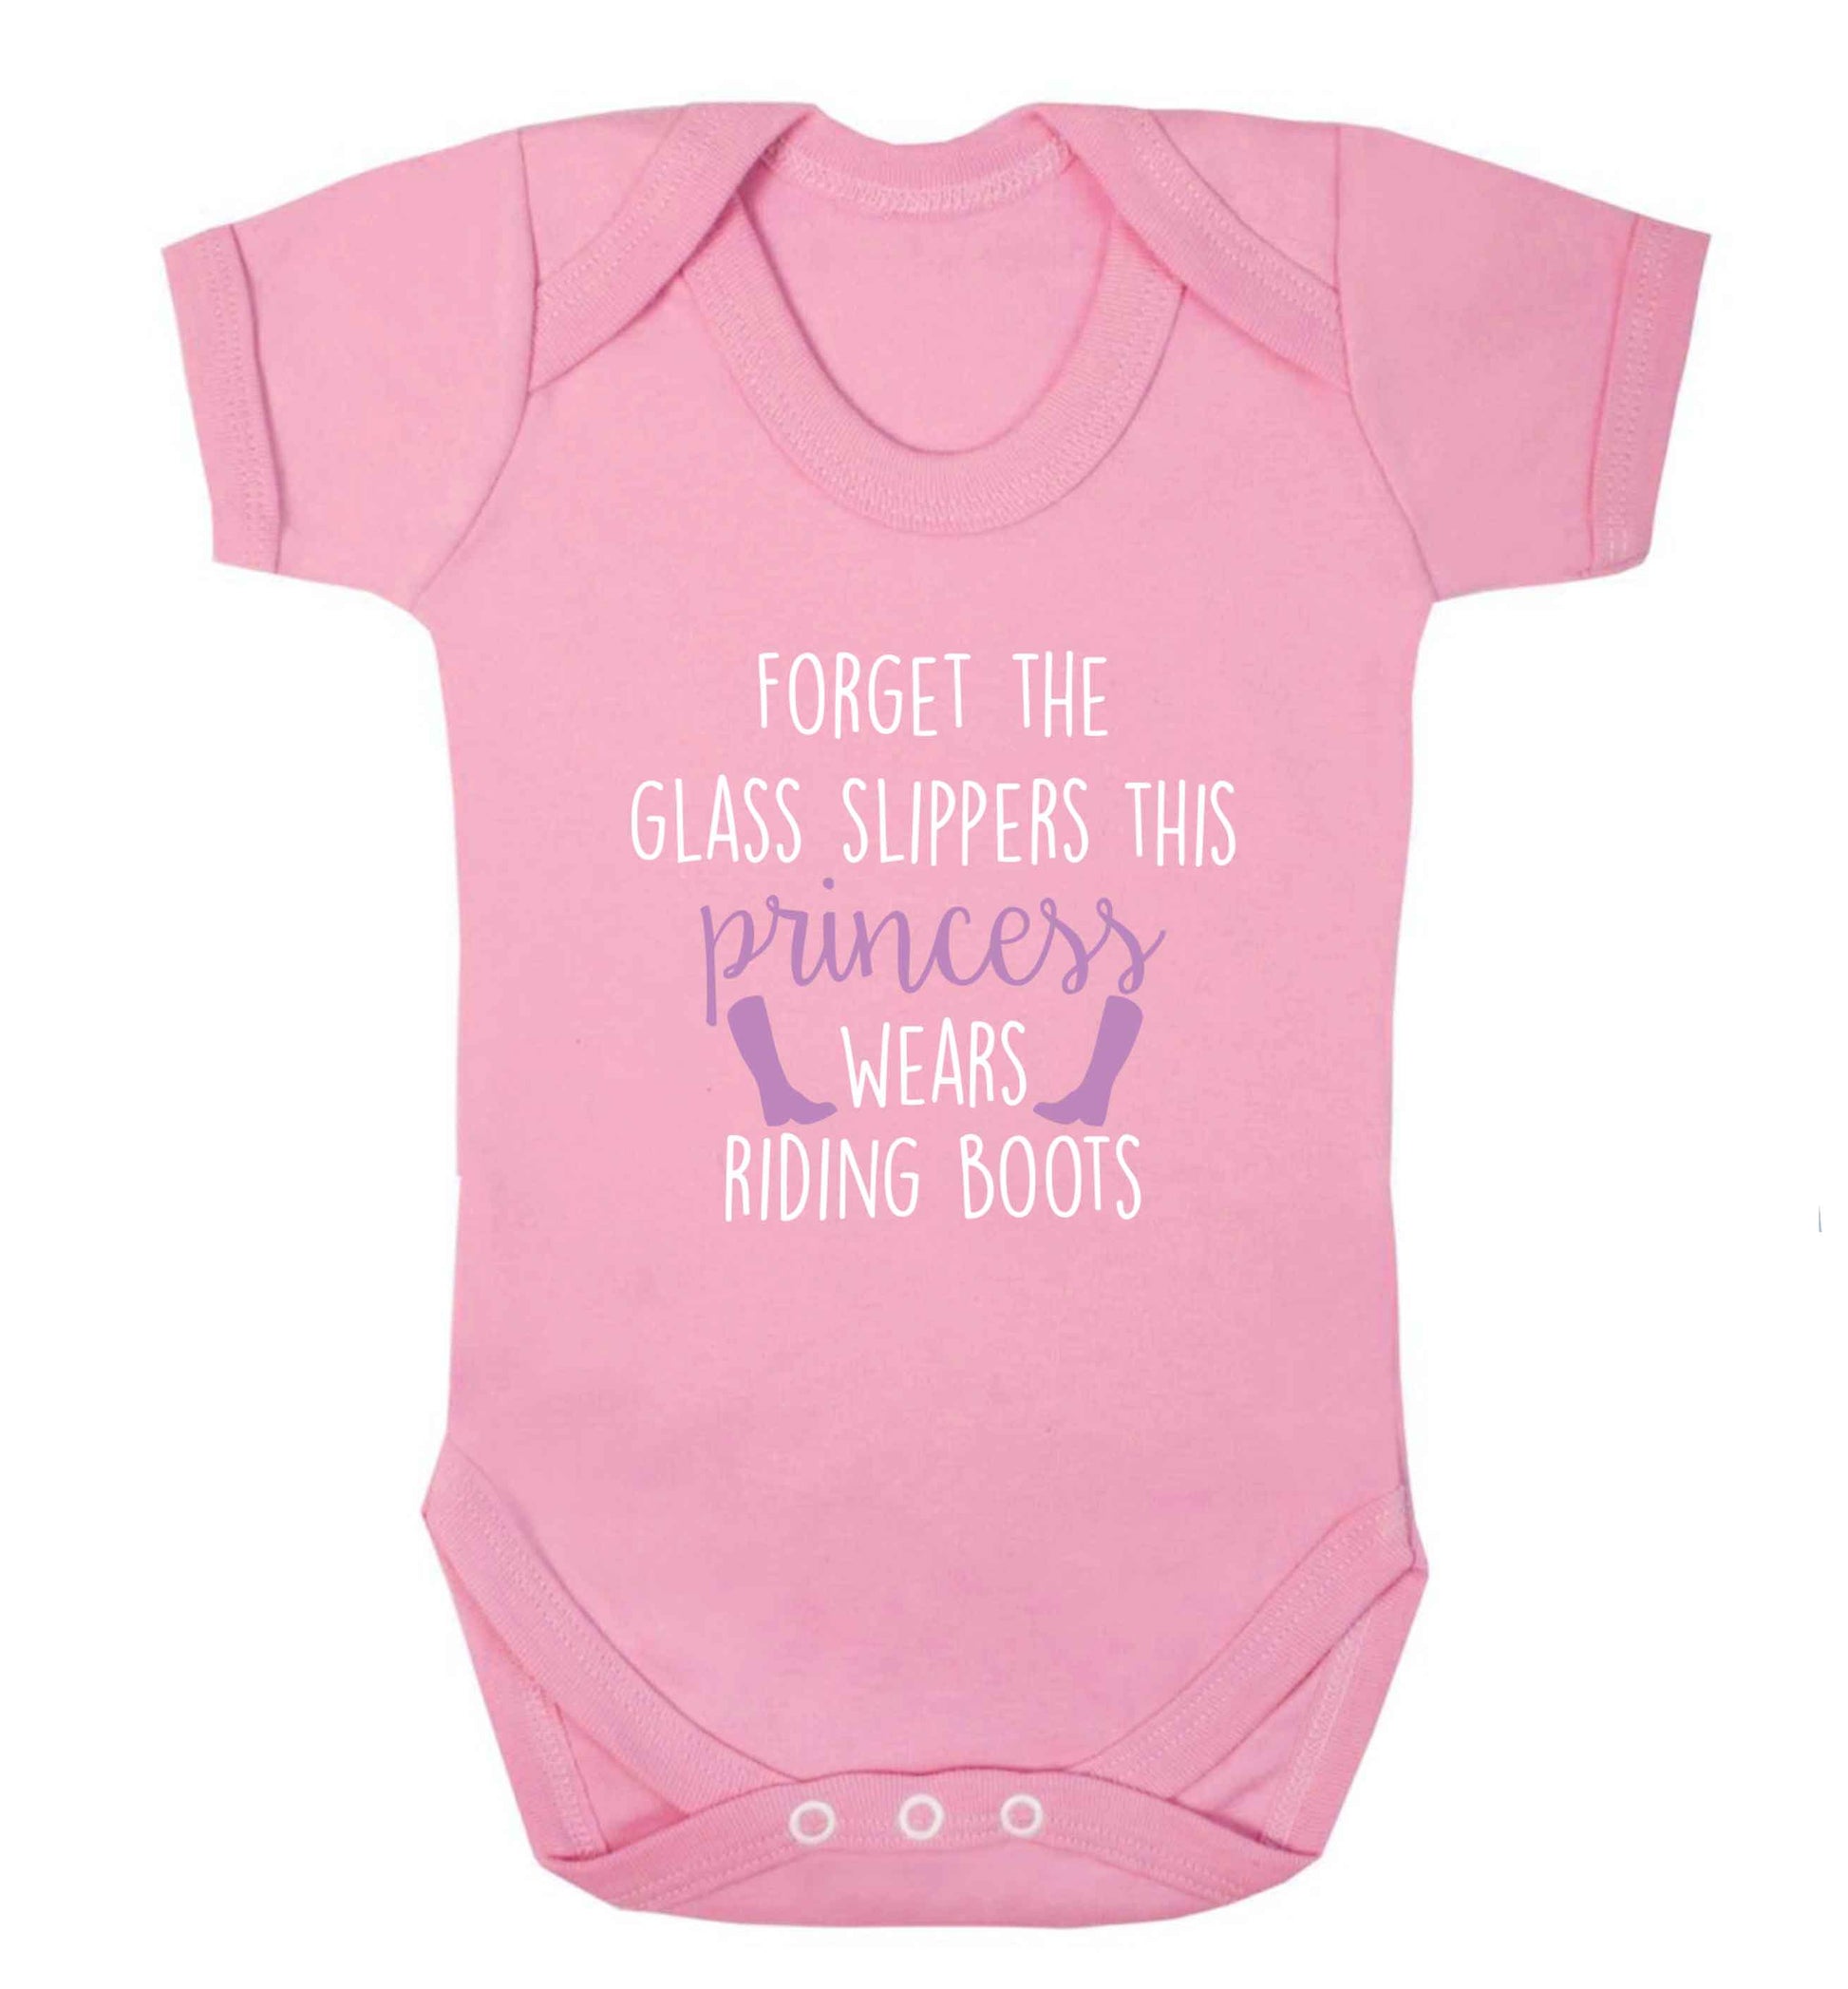 Forget the glass slippers this princess wears riding boots baby vest pale pink 18-24 months